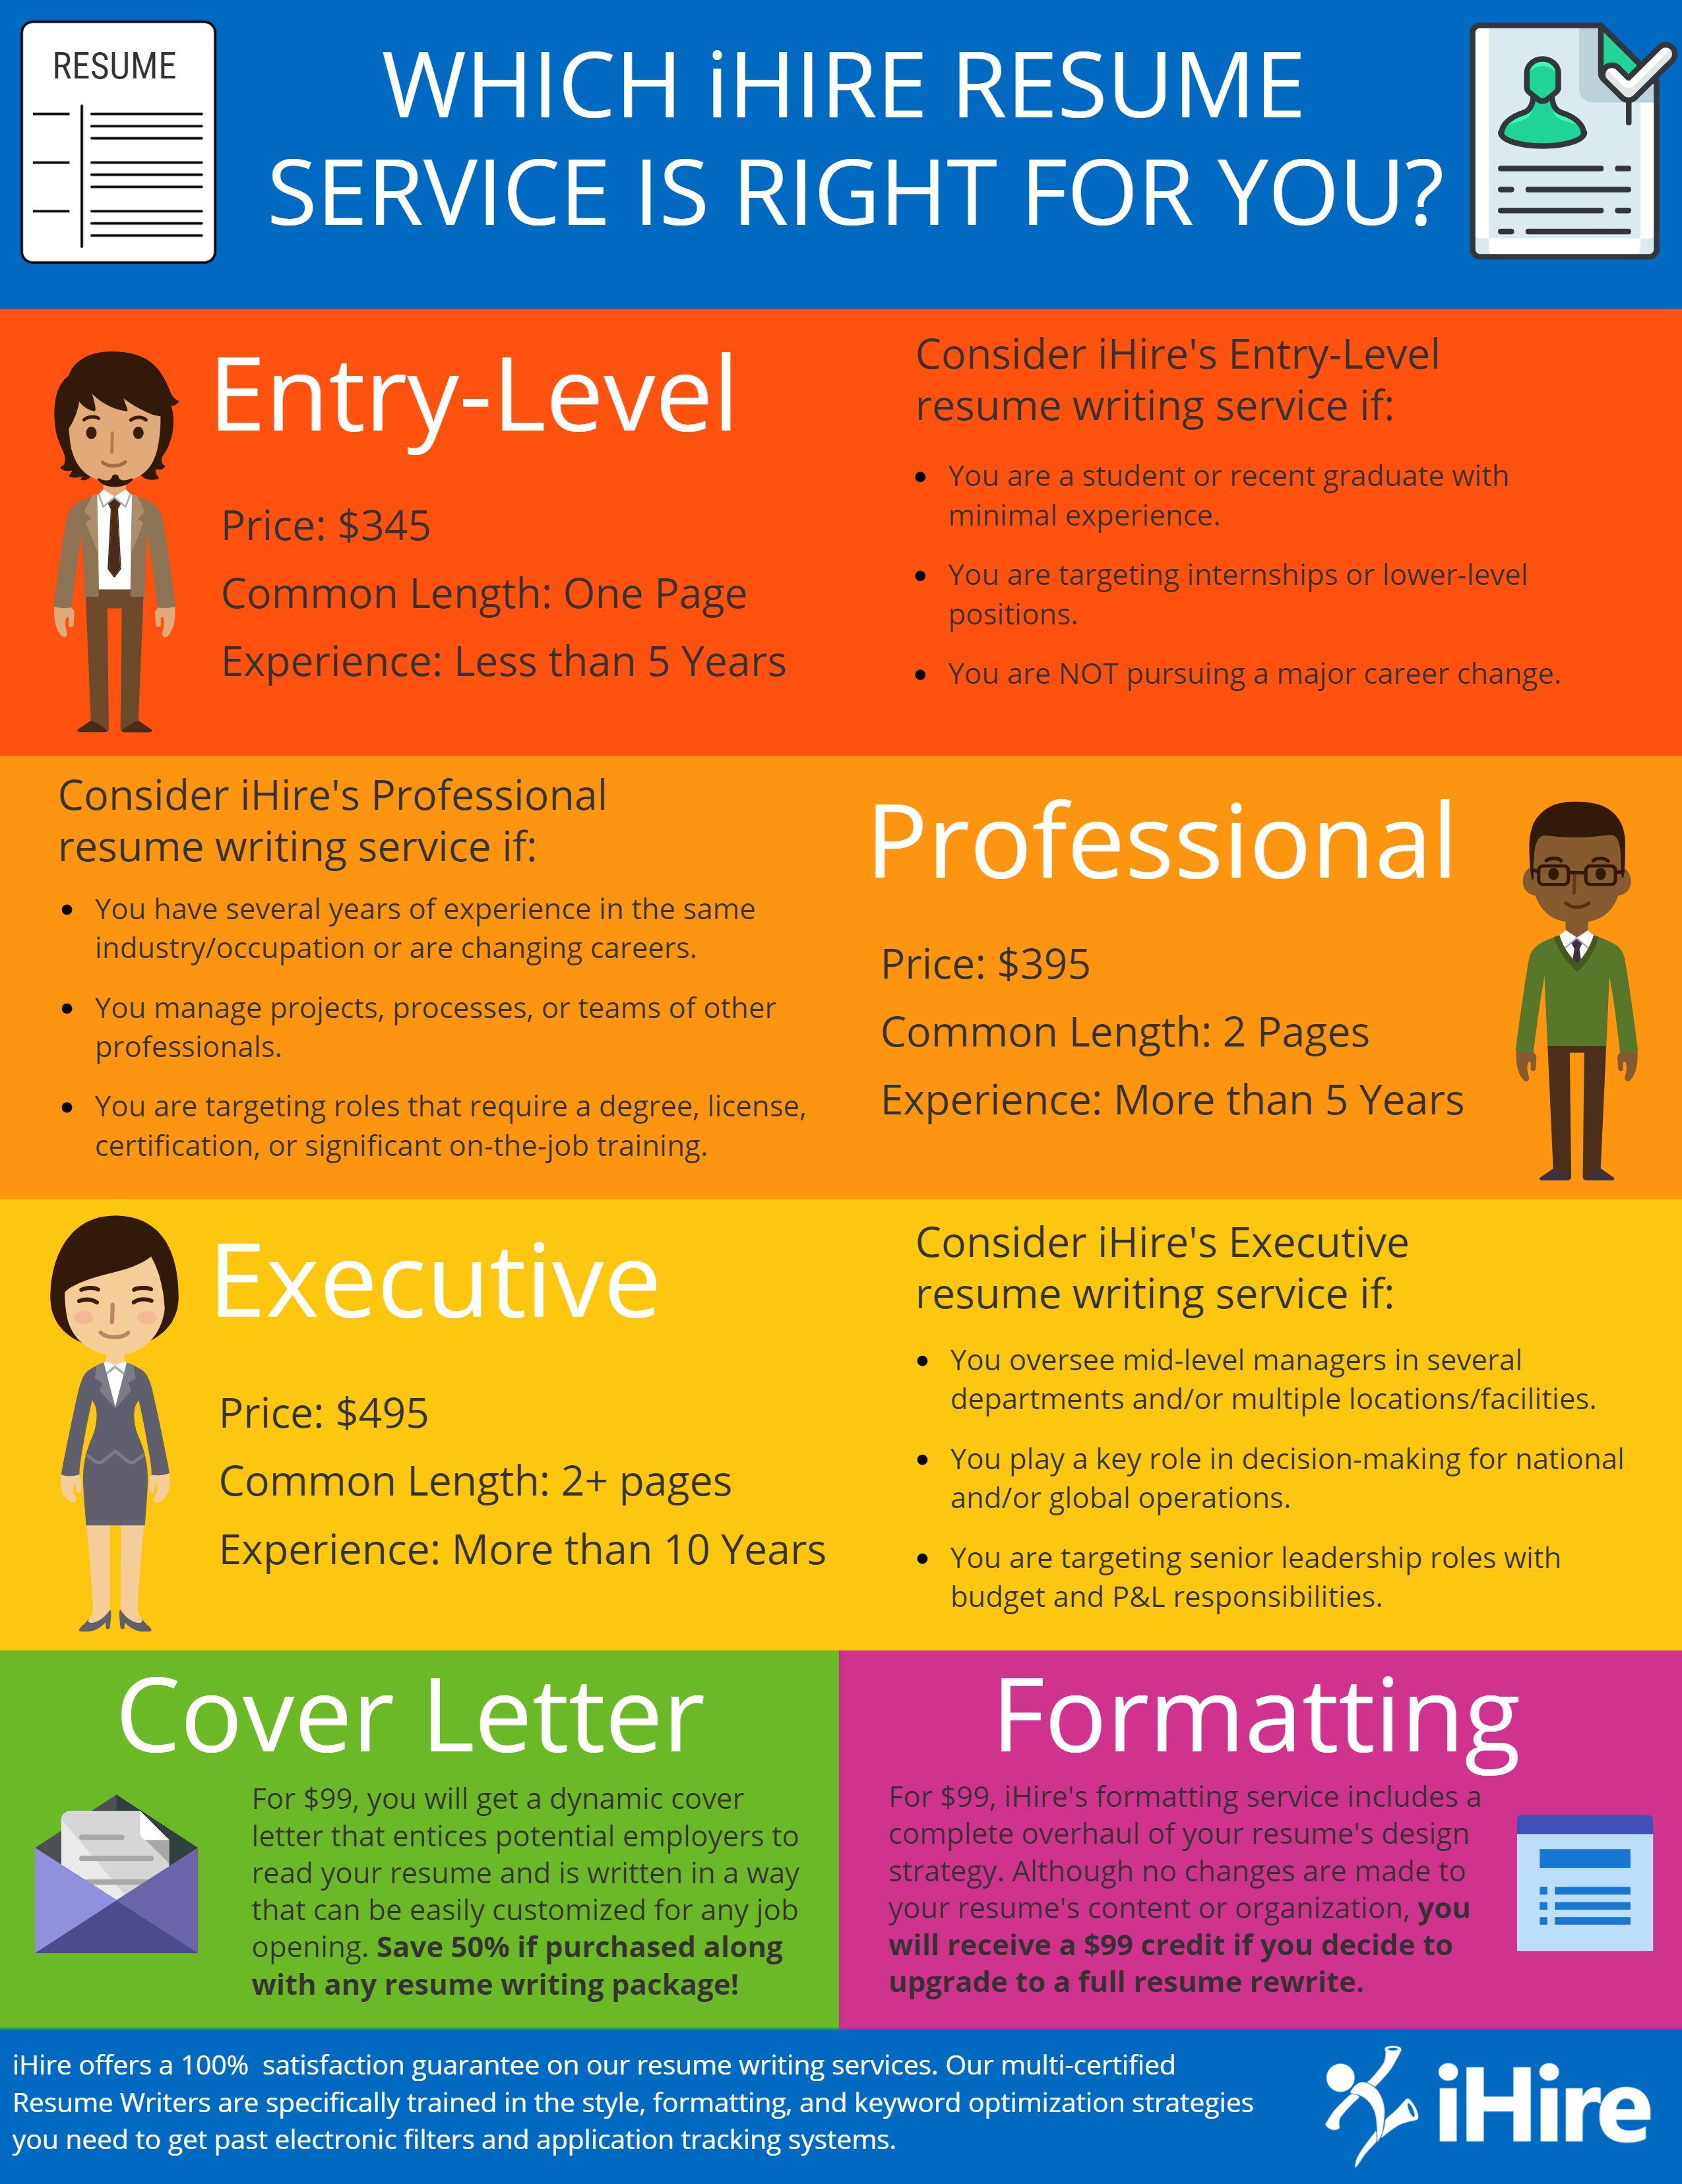 Using professional resume writing services